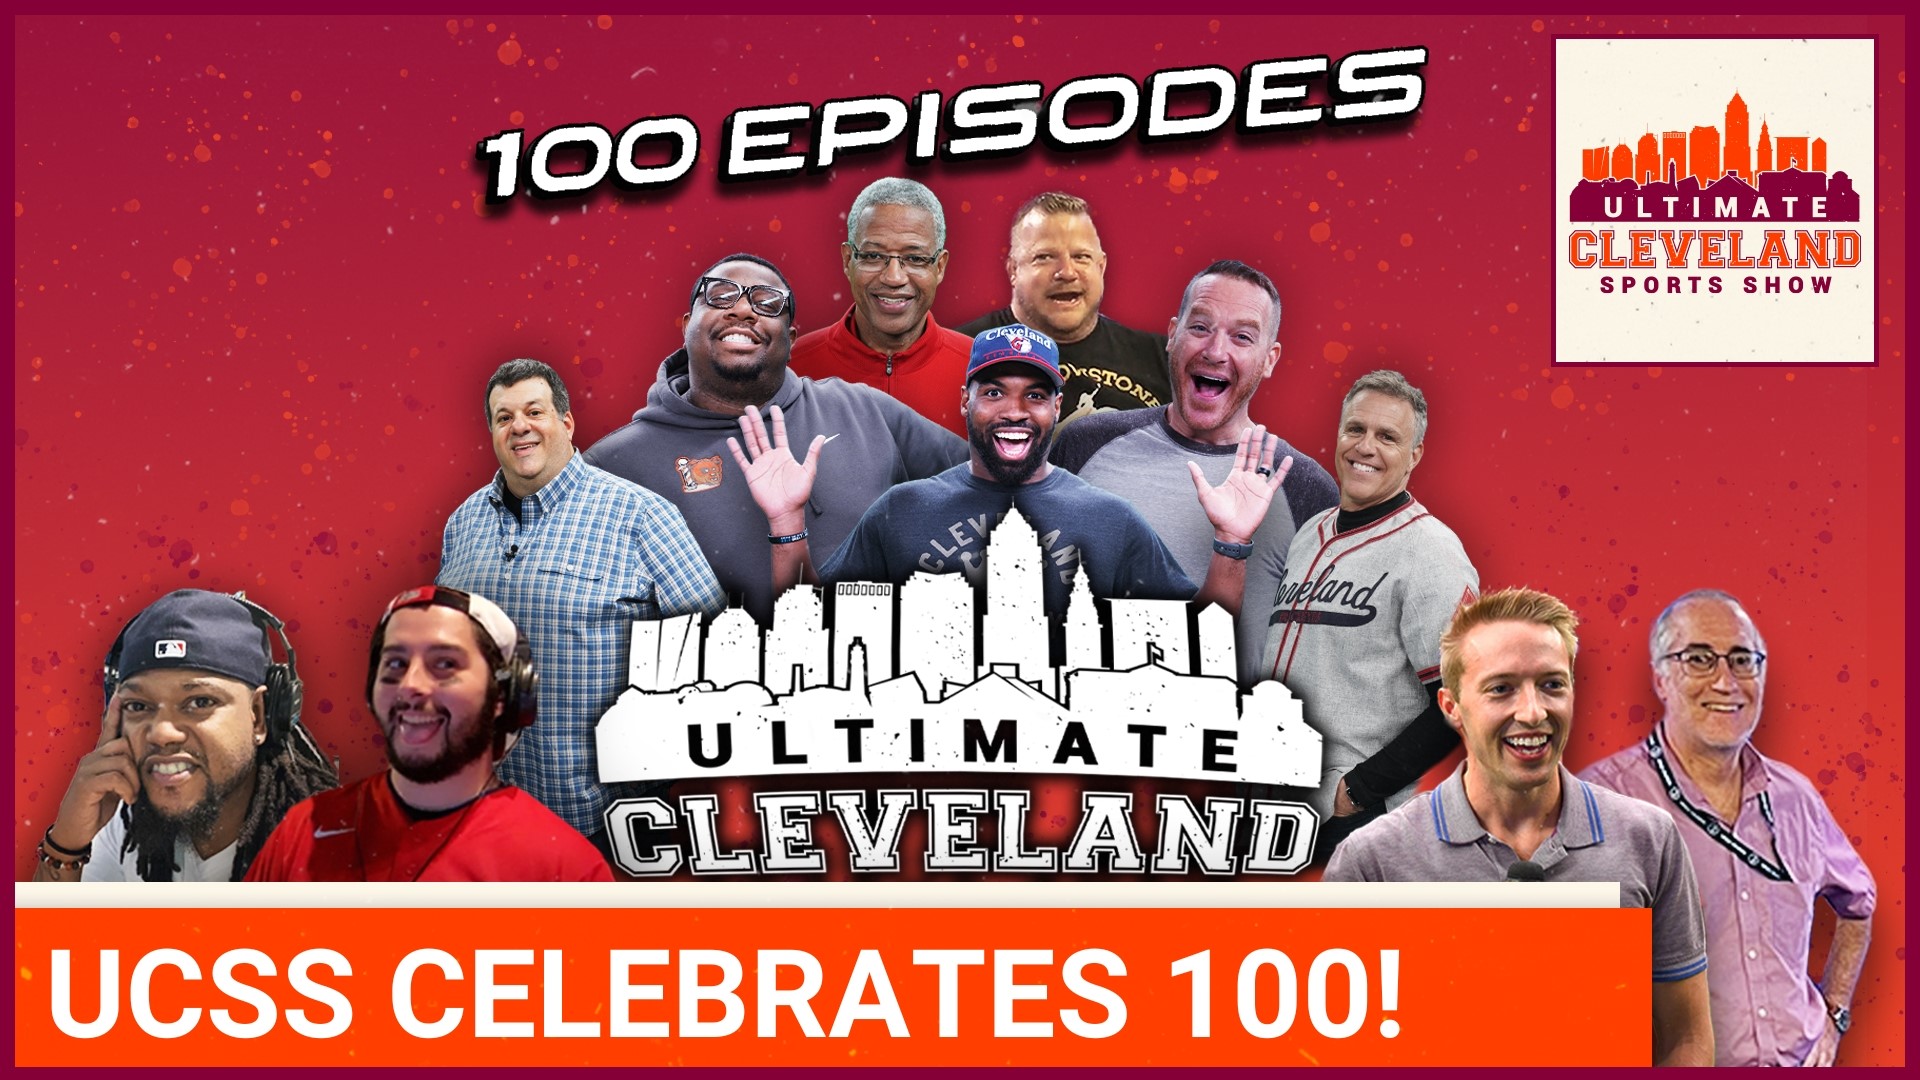 The Ultimate Cleveland Sports Show looks back at their best moments over 100 episodes.